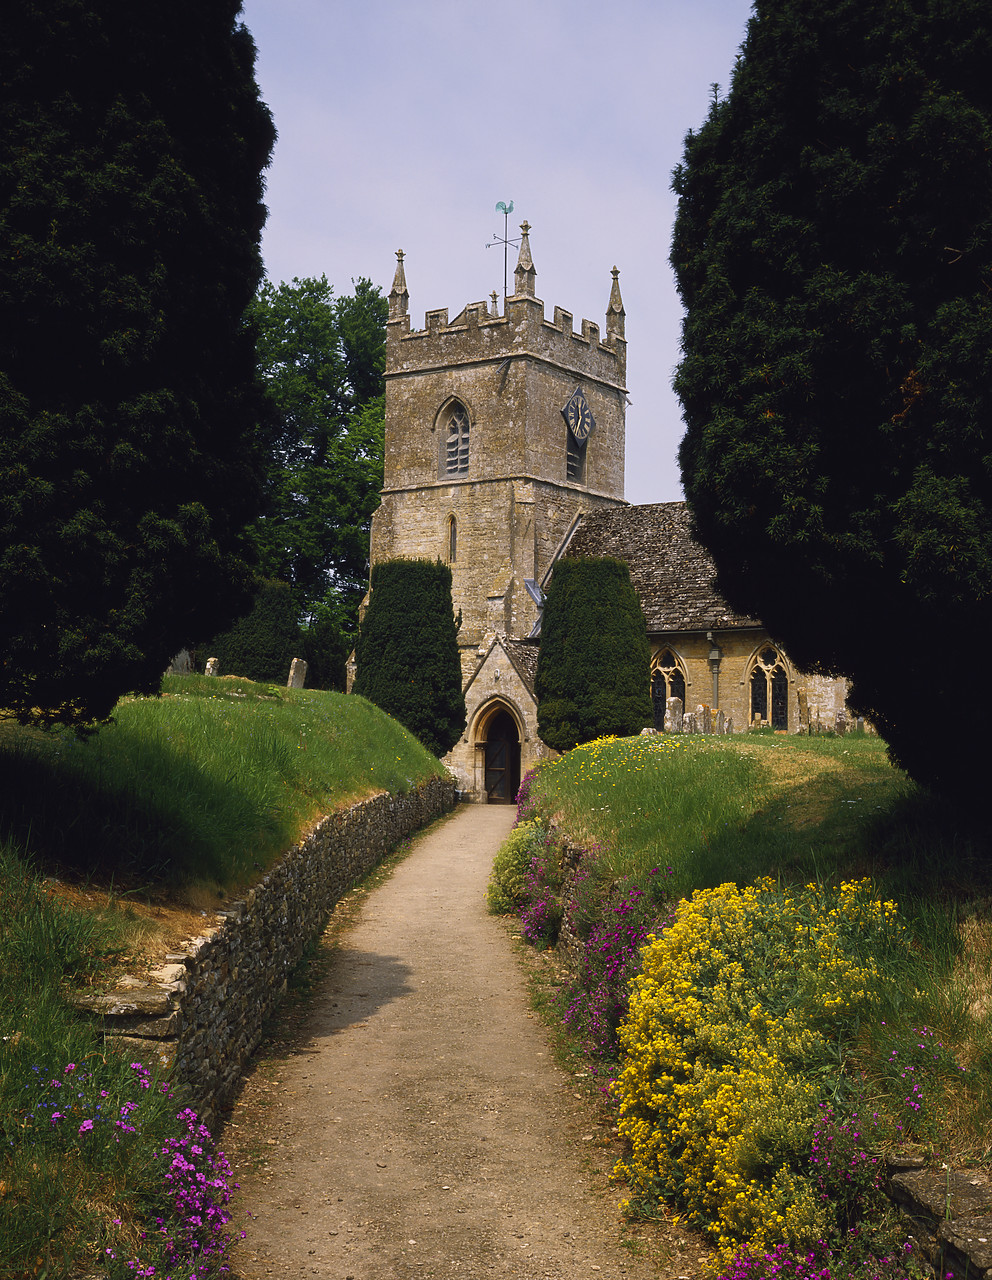 #924007-3 - Church at Upper Slaughter, Gloucestershire, England